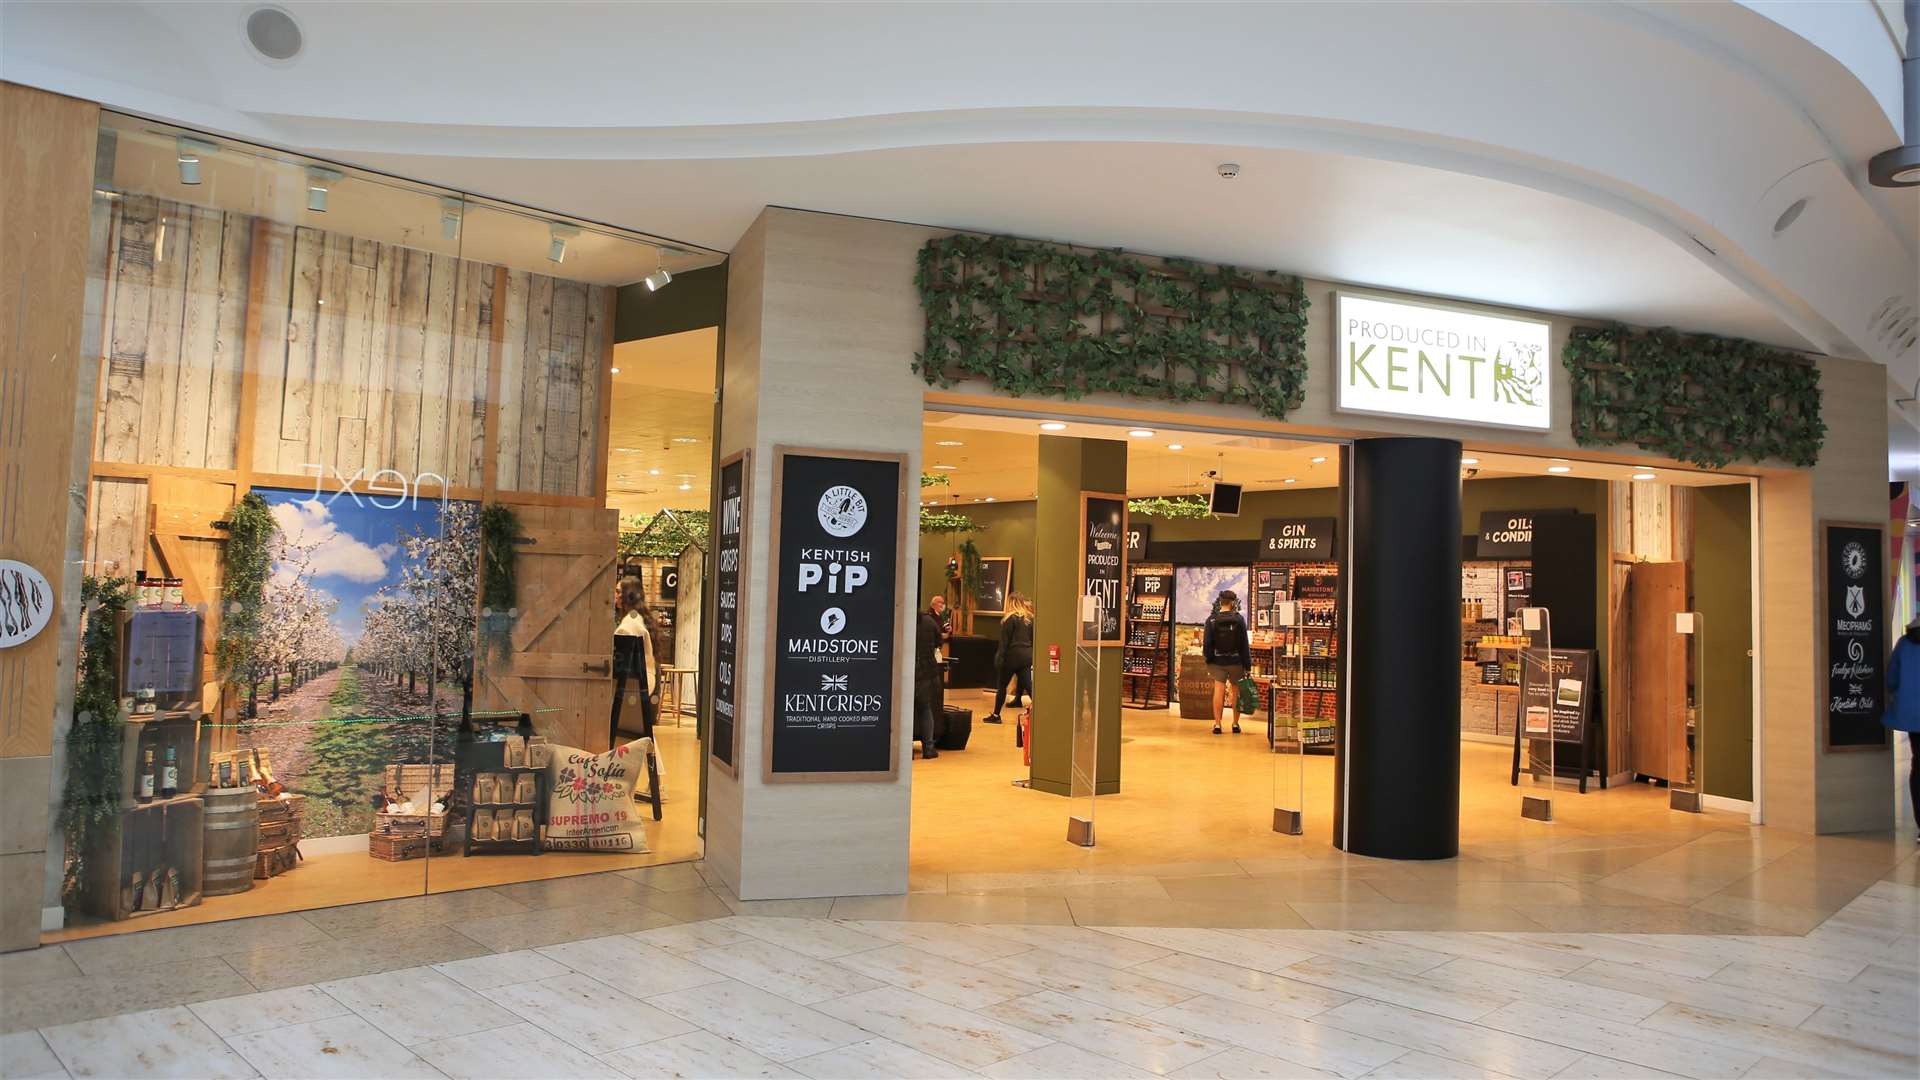 The Produced in Kent shop at Bluewater proved a hit